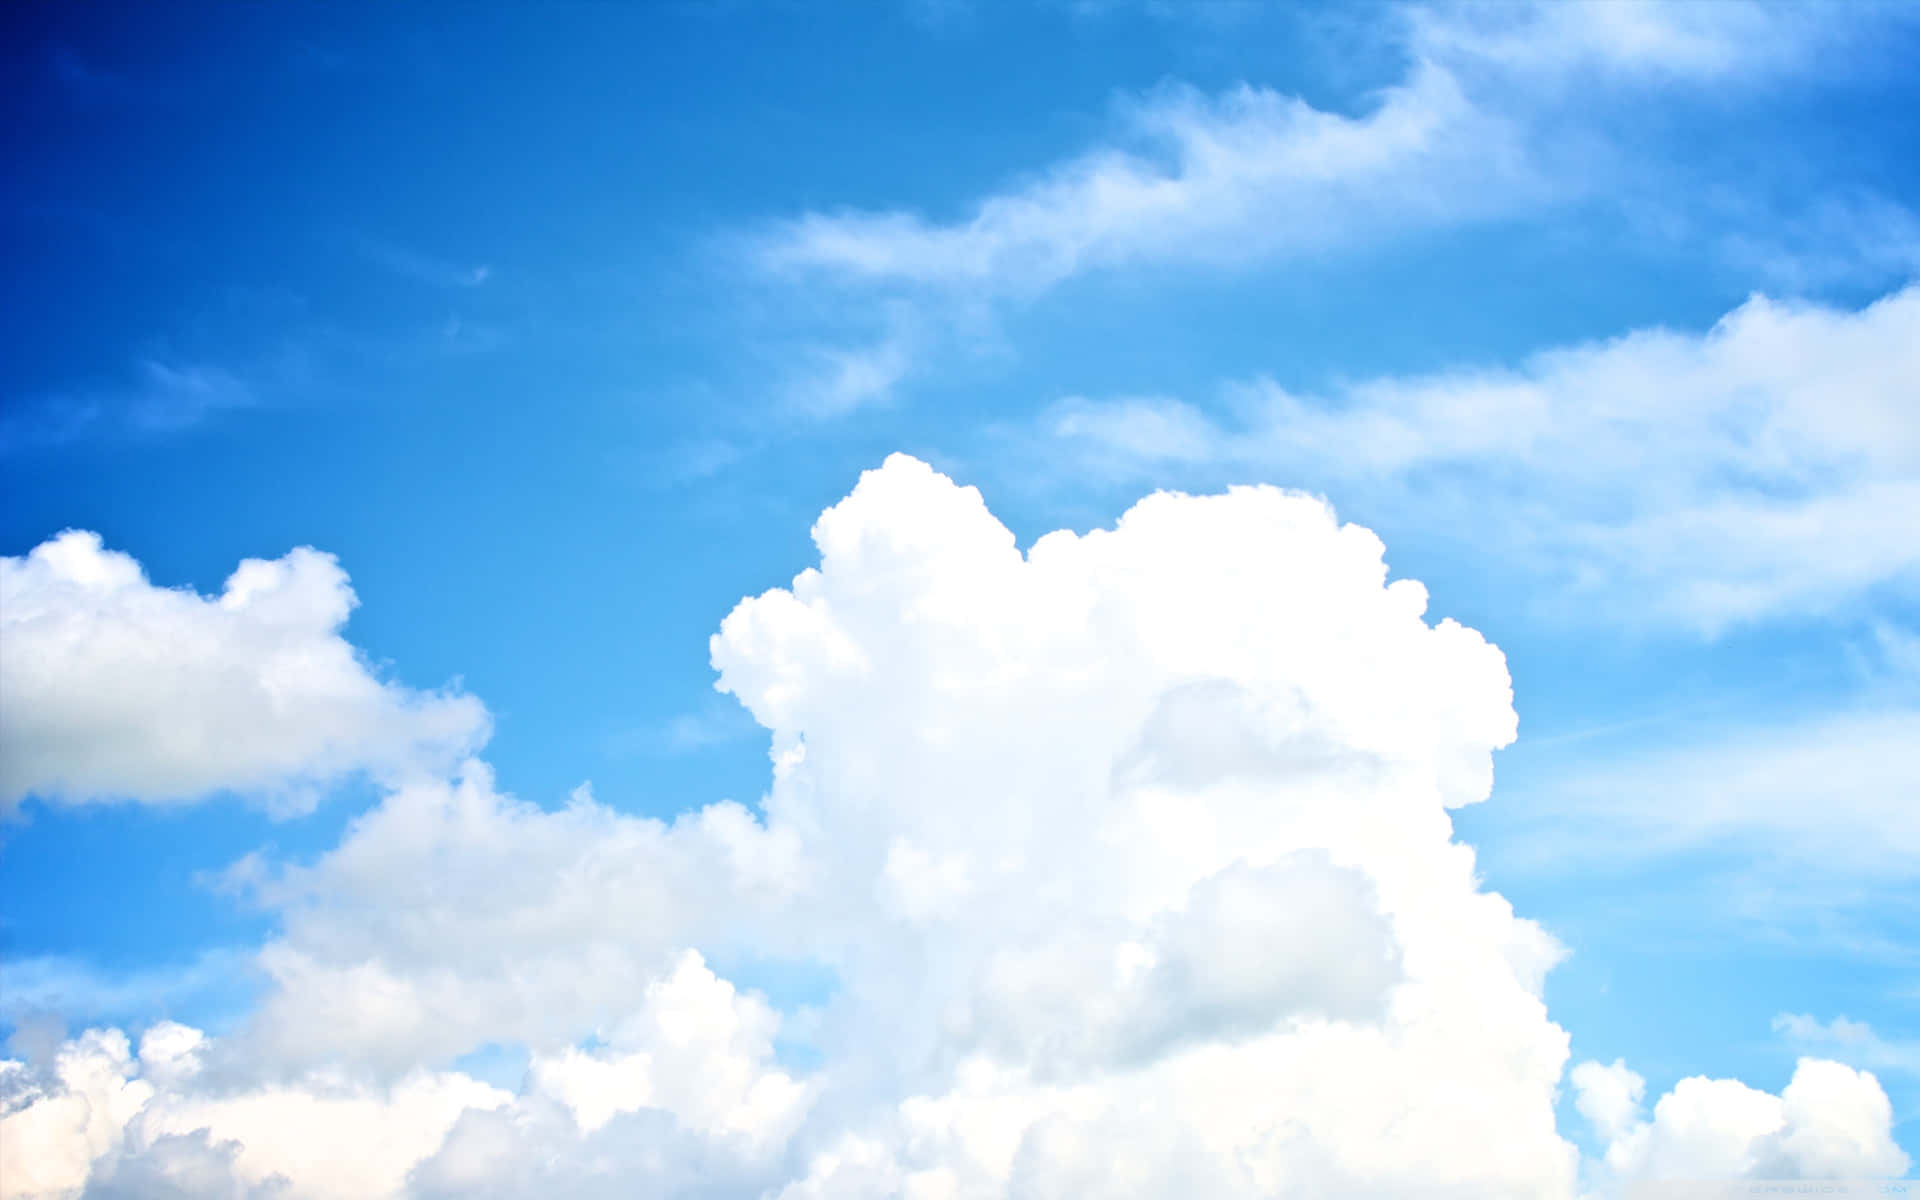 A Gloomy Blue Sky with White Clouds Wallpaper